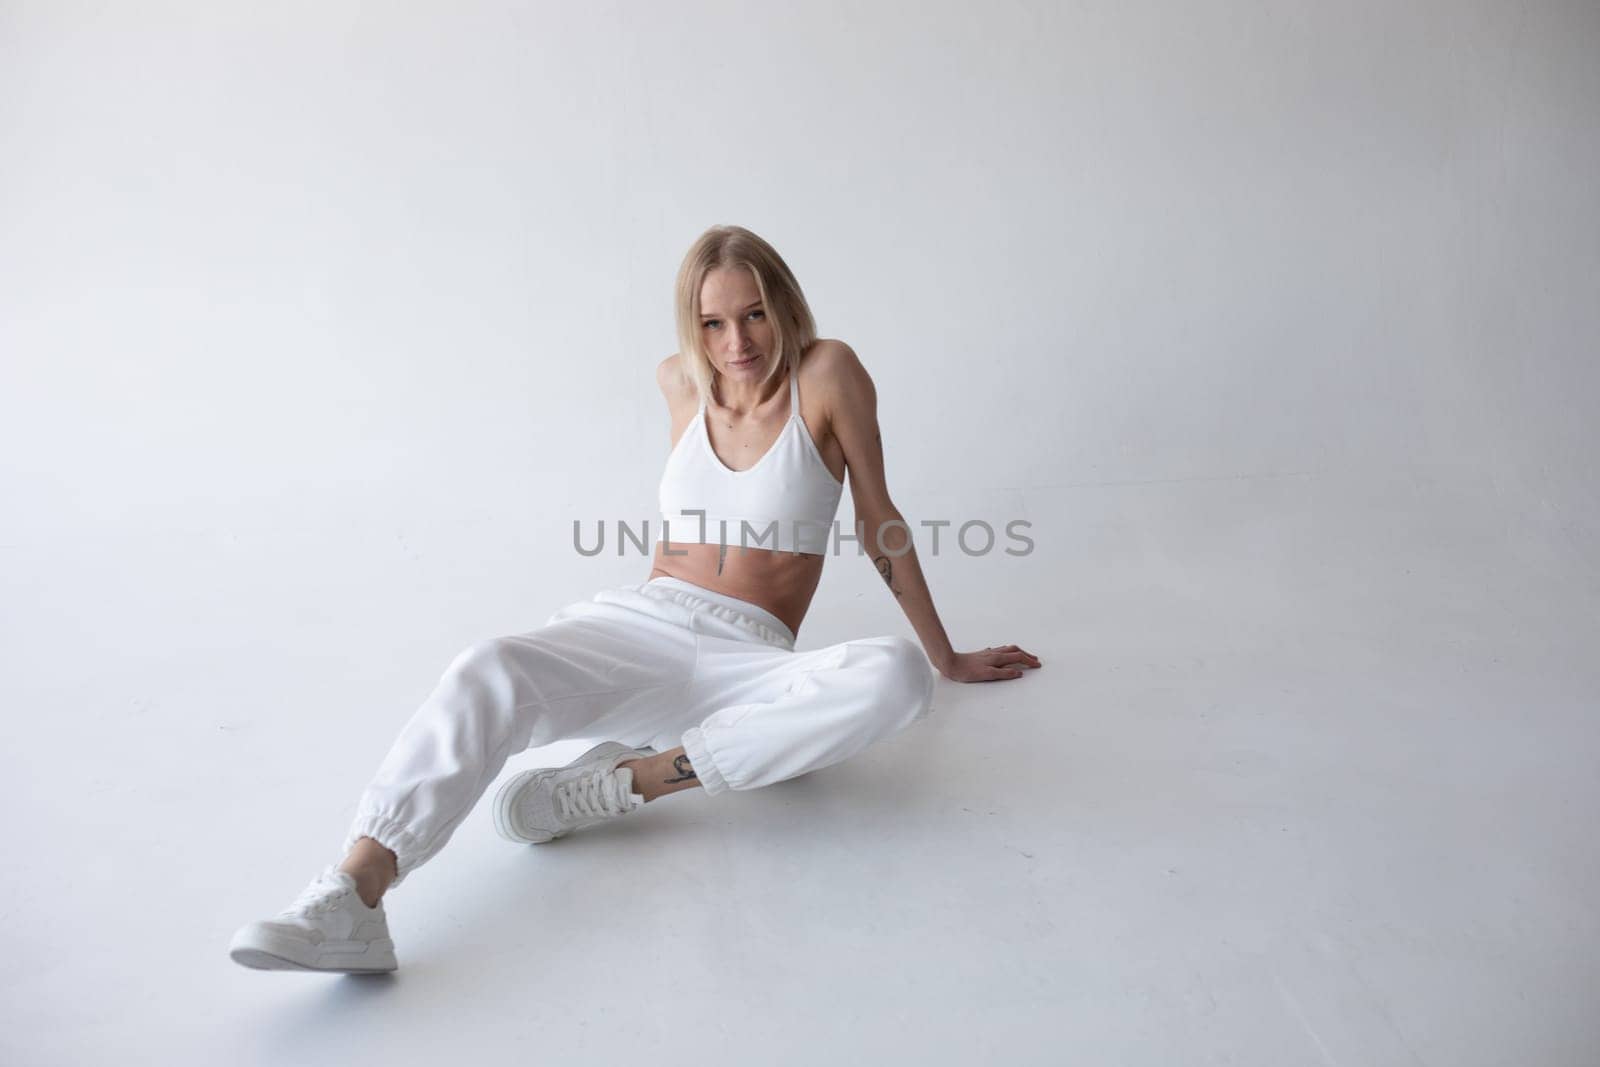 Beautiful blonde girl in a white top and tights posing on a white background. High quality photo